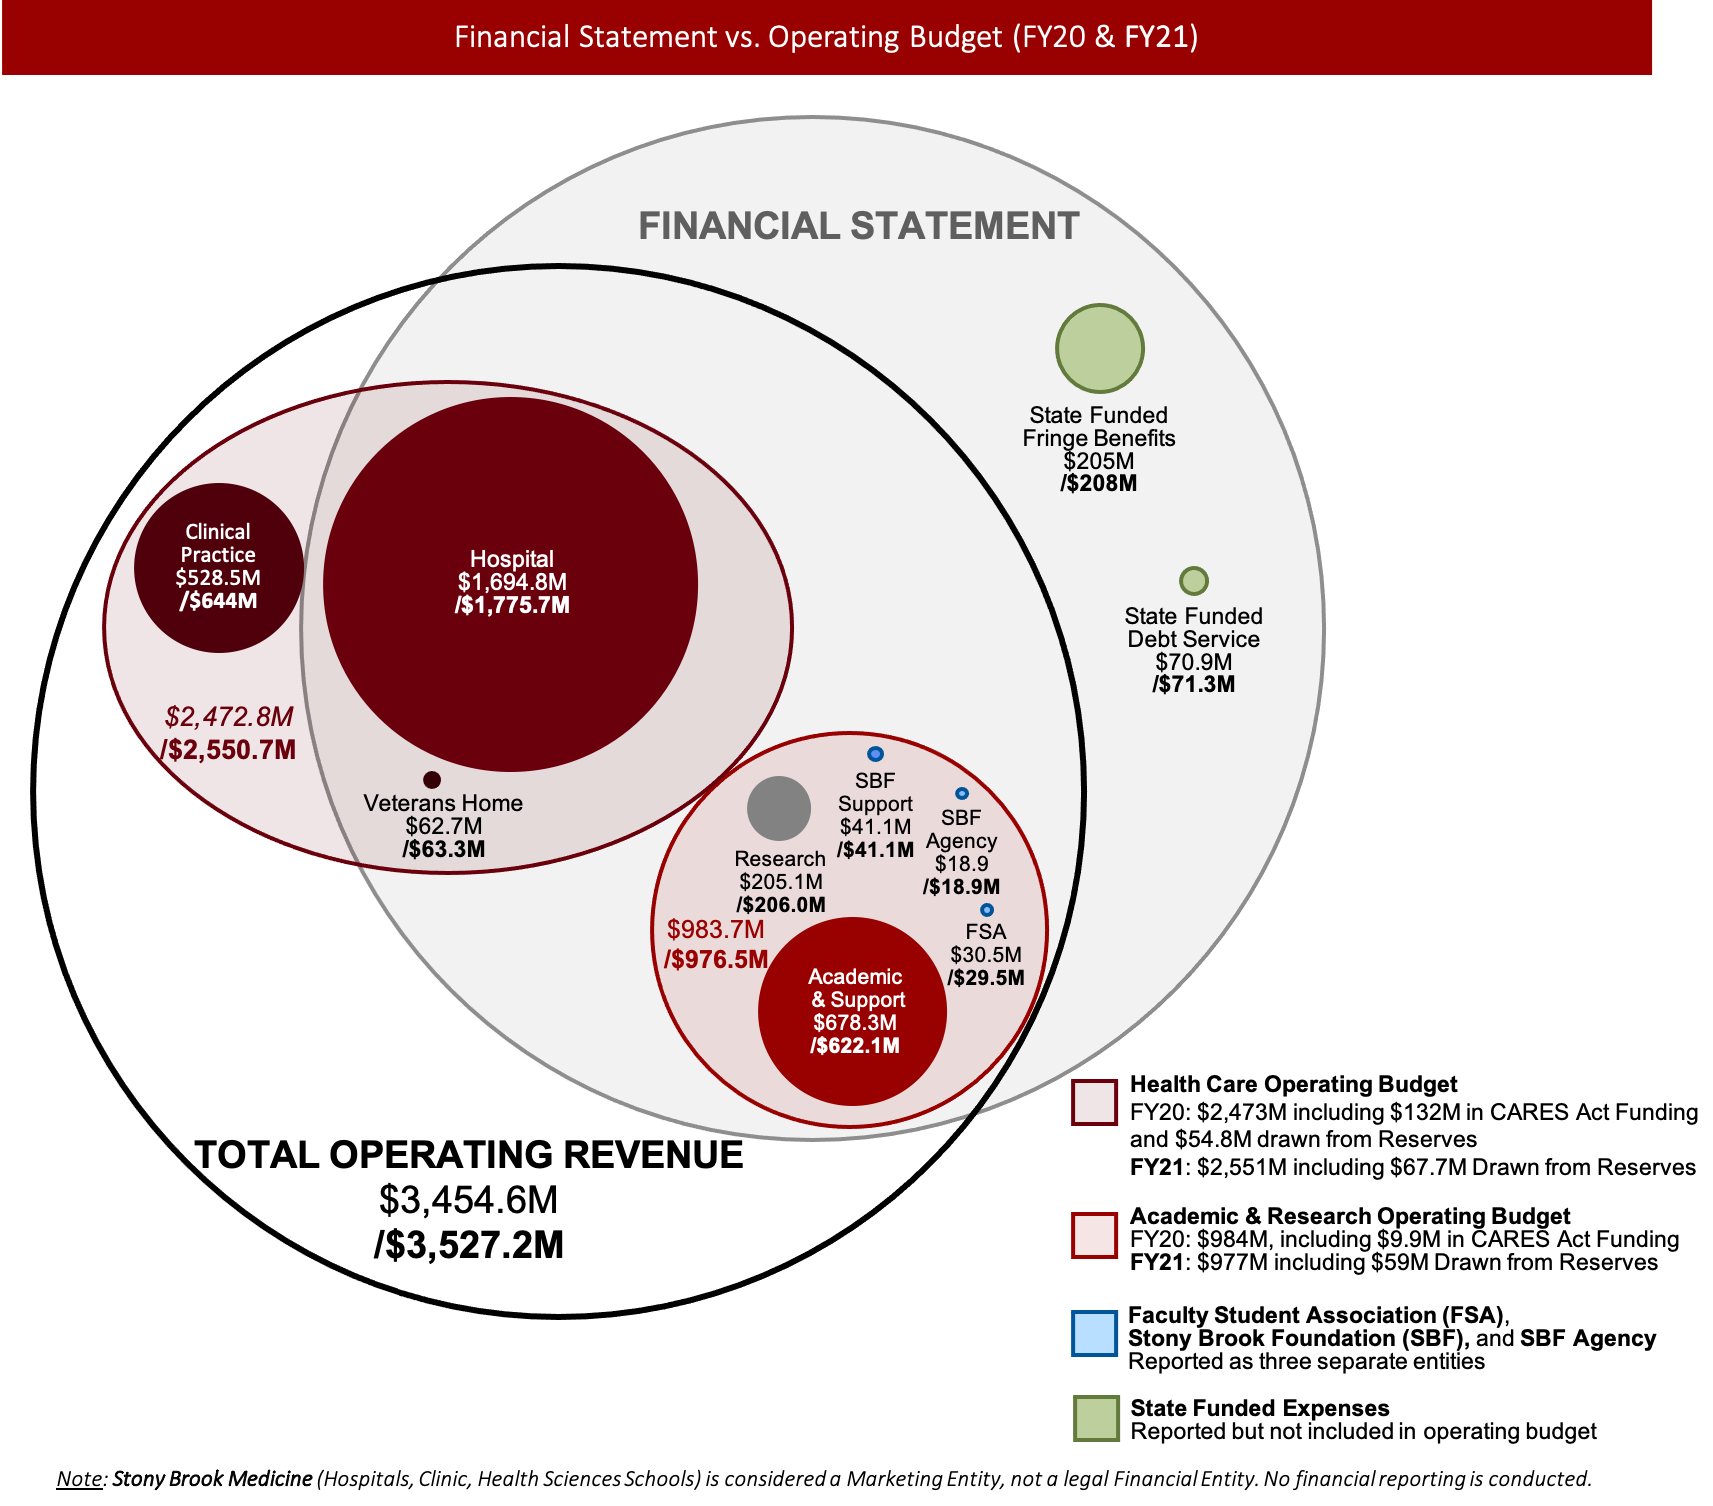 Venn diagram showing how revenue is distributed at SBU.  Included in Financial Statement & Total Operating Revenue: Hospital, Veterans' Home, Academic & Support, Research, SBF SUpport, SBF Agency, Faculty Student Association  Under Total operating Revenue only:  Clinical Practices  Under Financial Statement only: State Funded Fringe Benefits and State Funded Debt Service